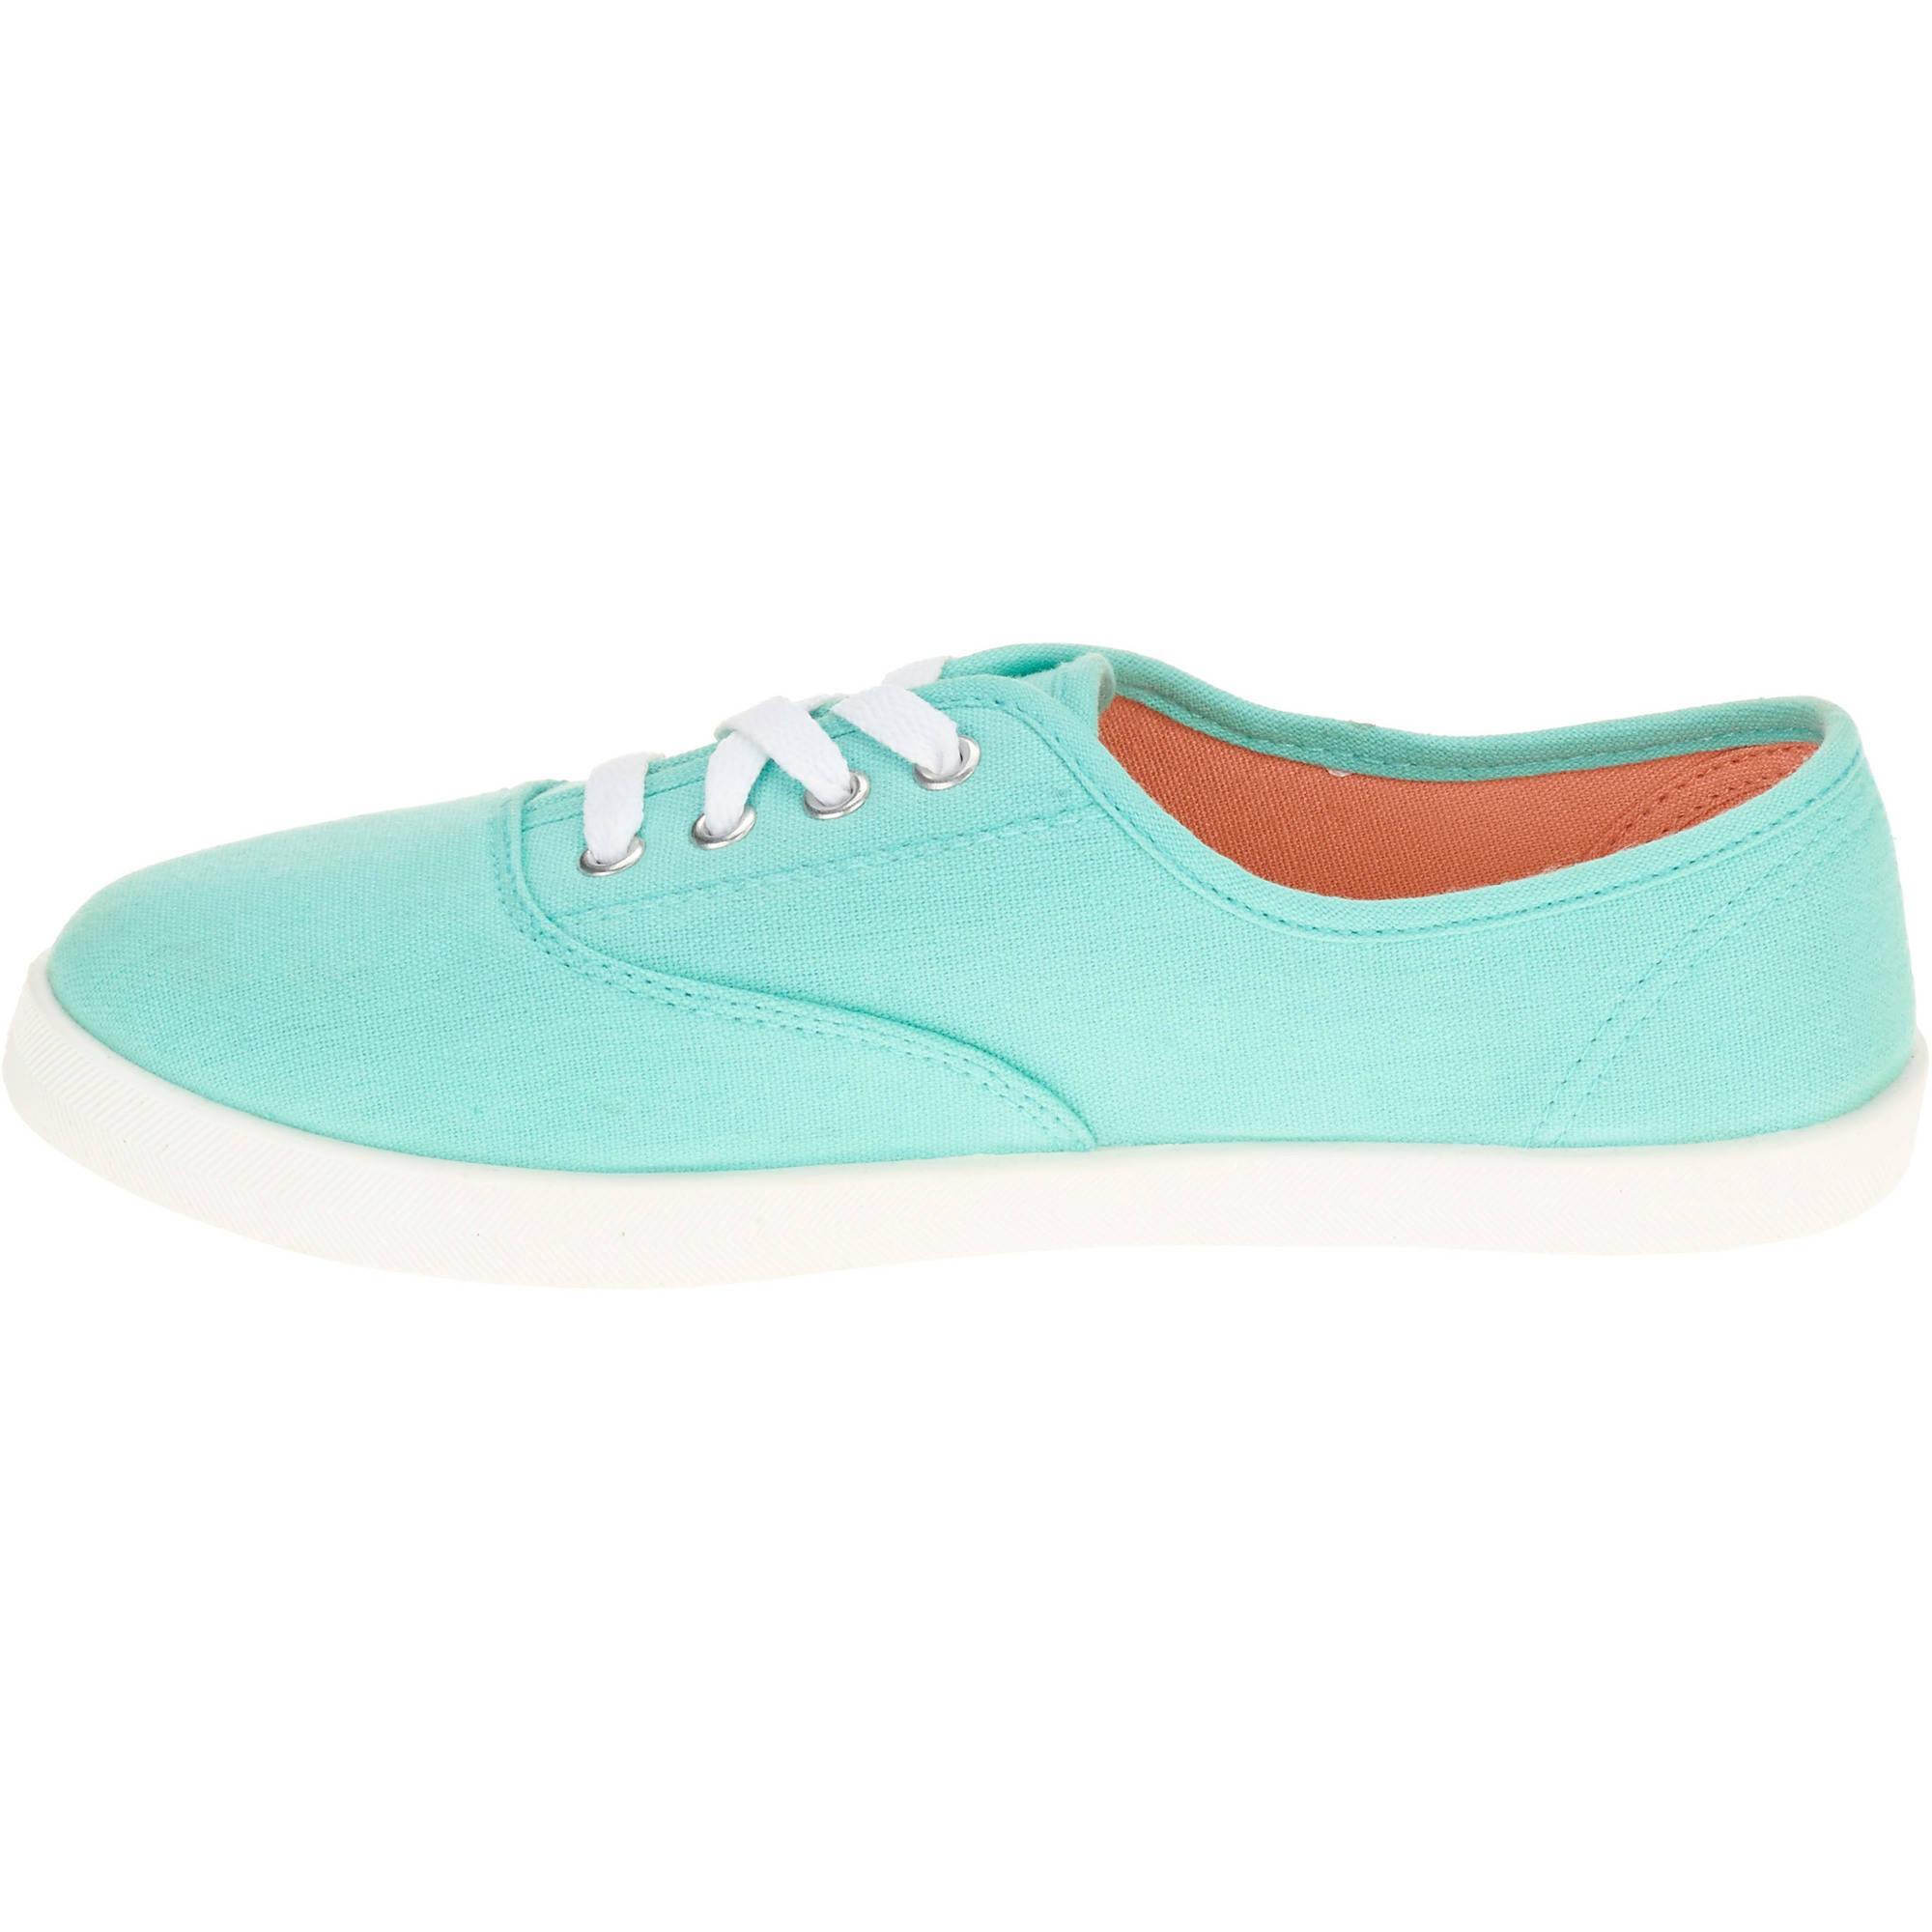 Women's Casual Canvas Lace-up Sneaker - image 2 of 5